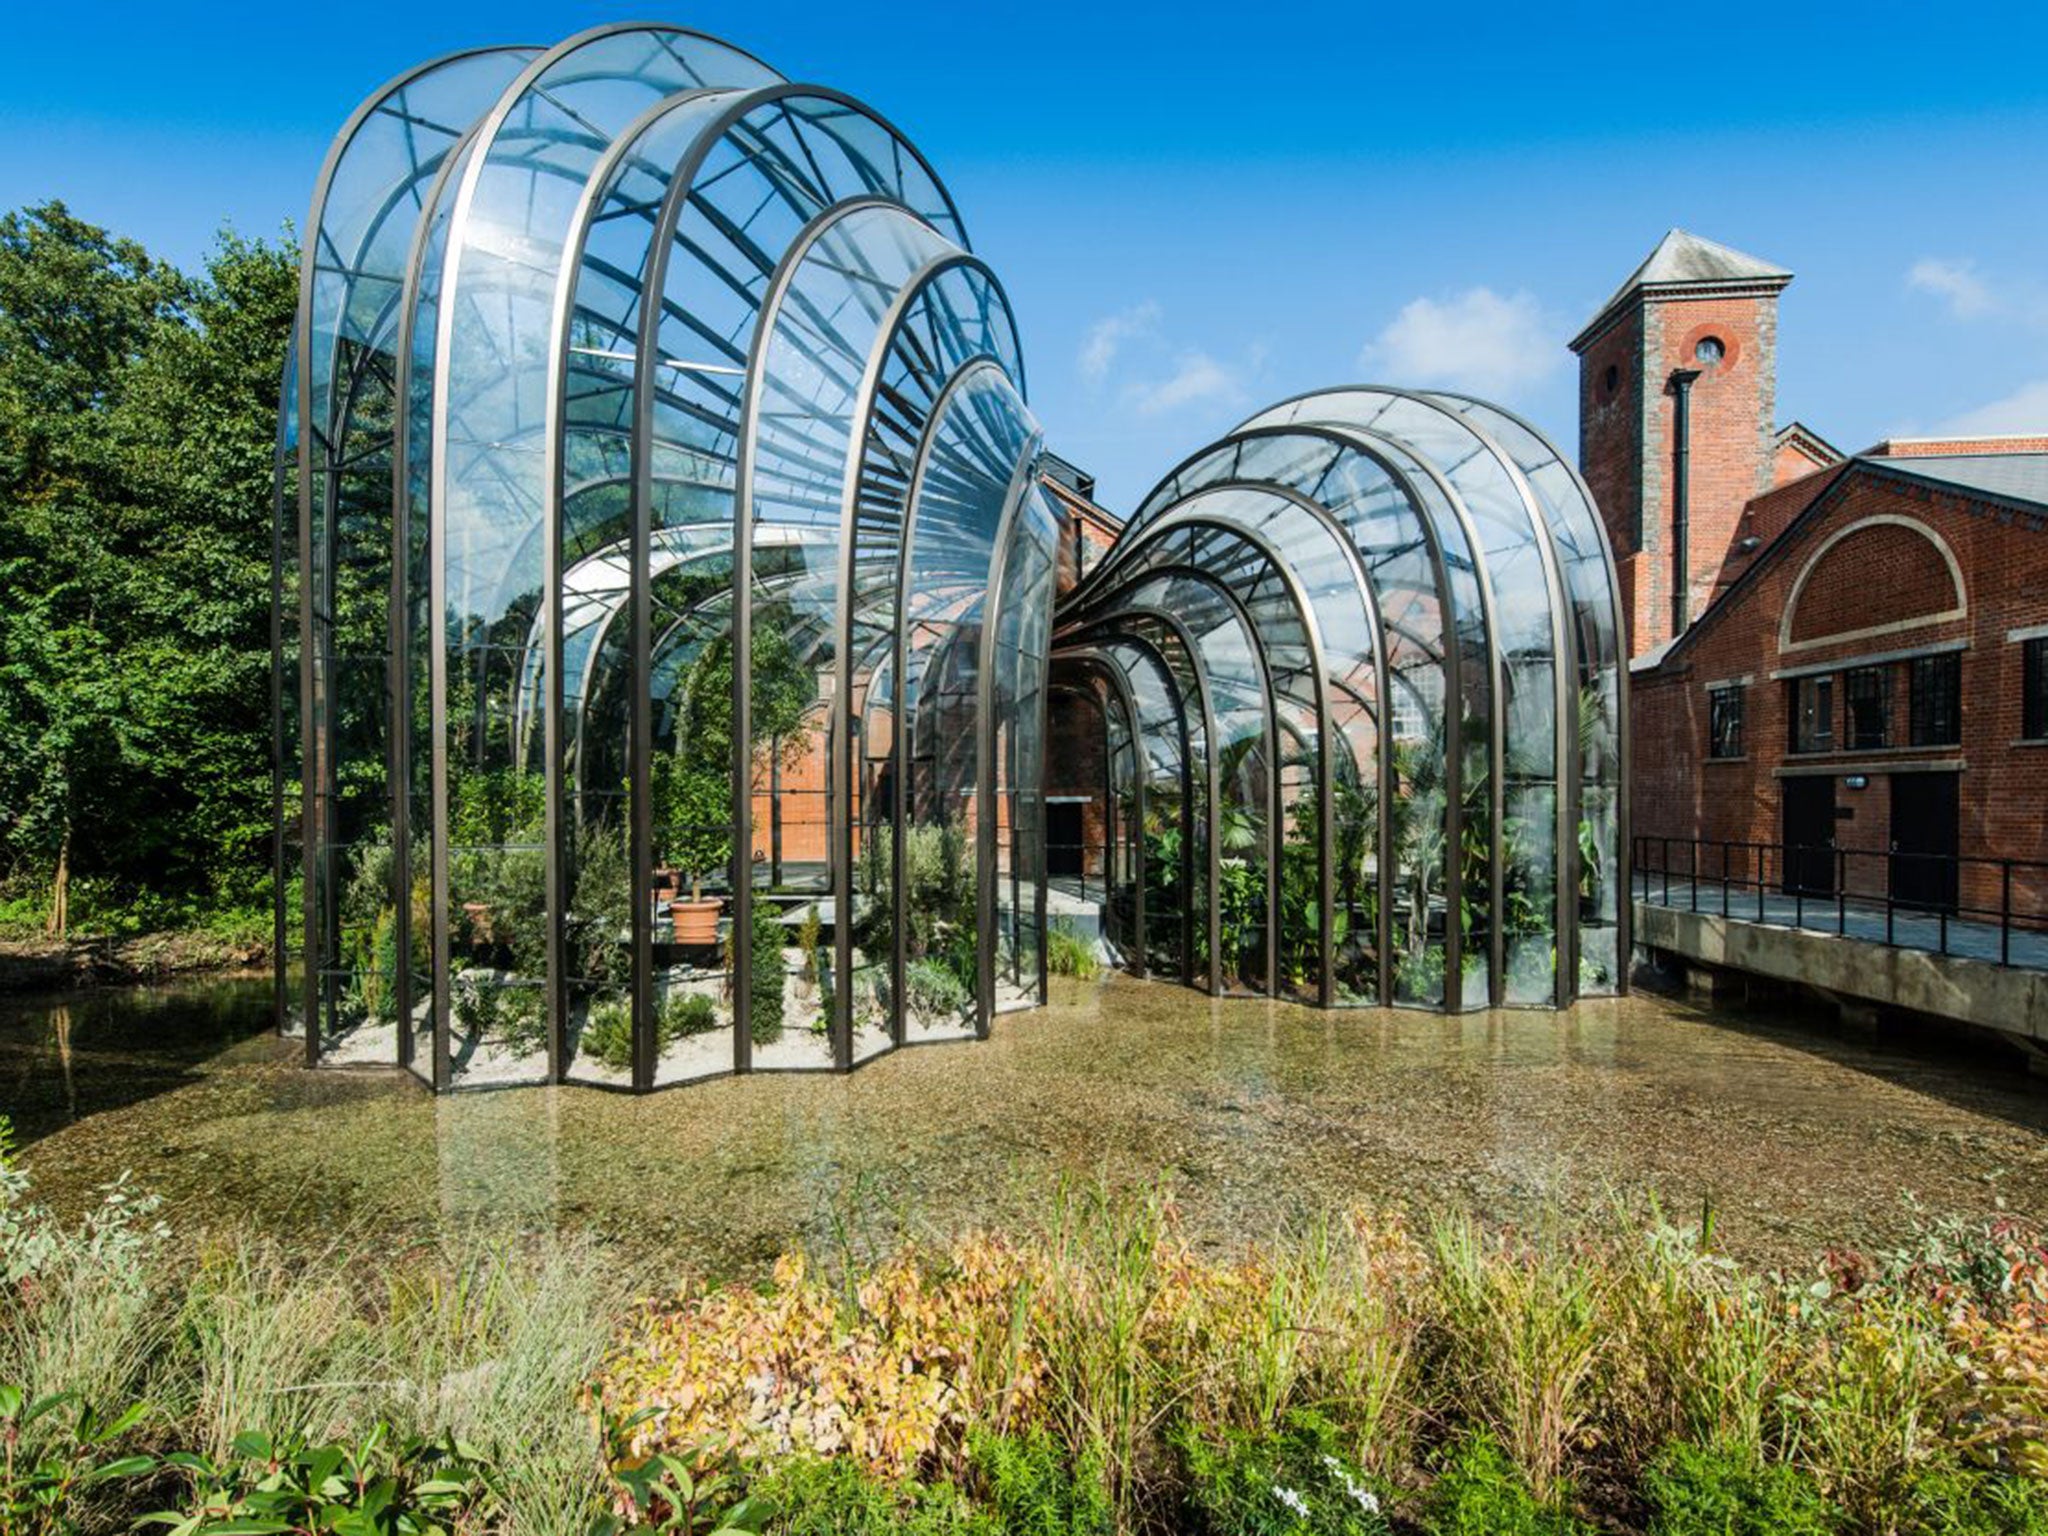 The Bombay Saphire distillery’s botanical glasshouses have been created by Thomas Heatherwick